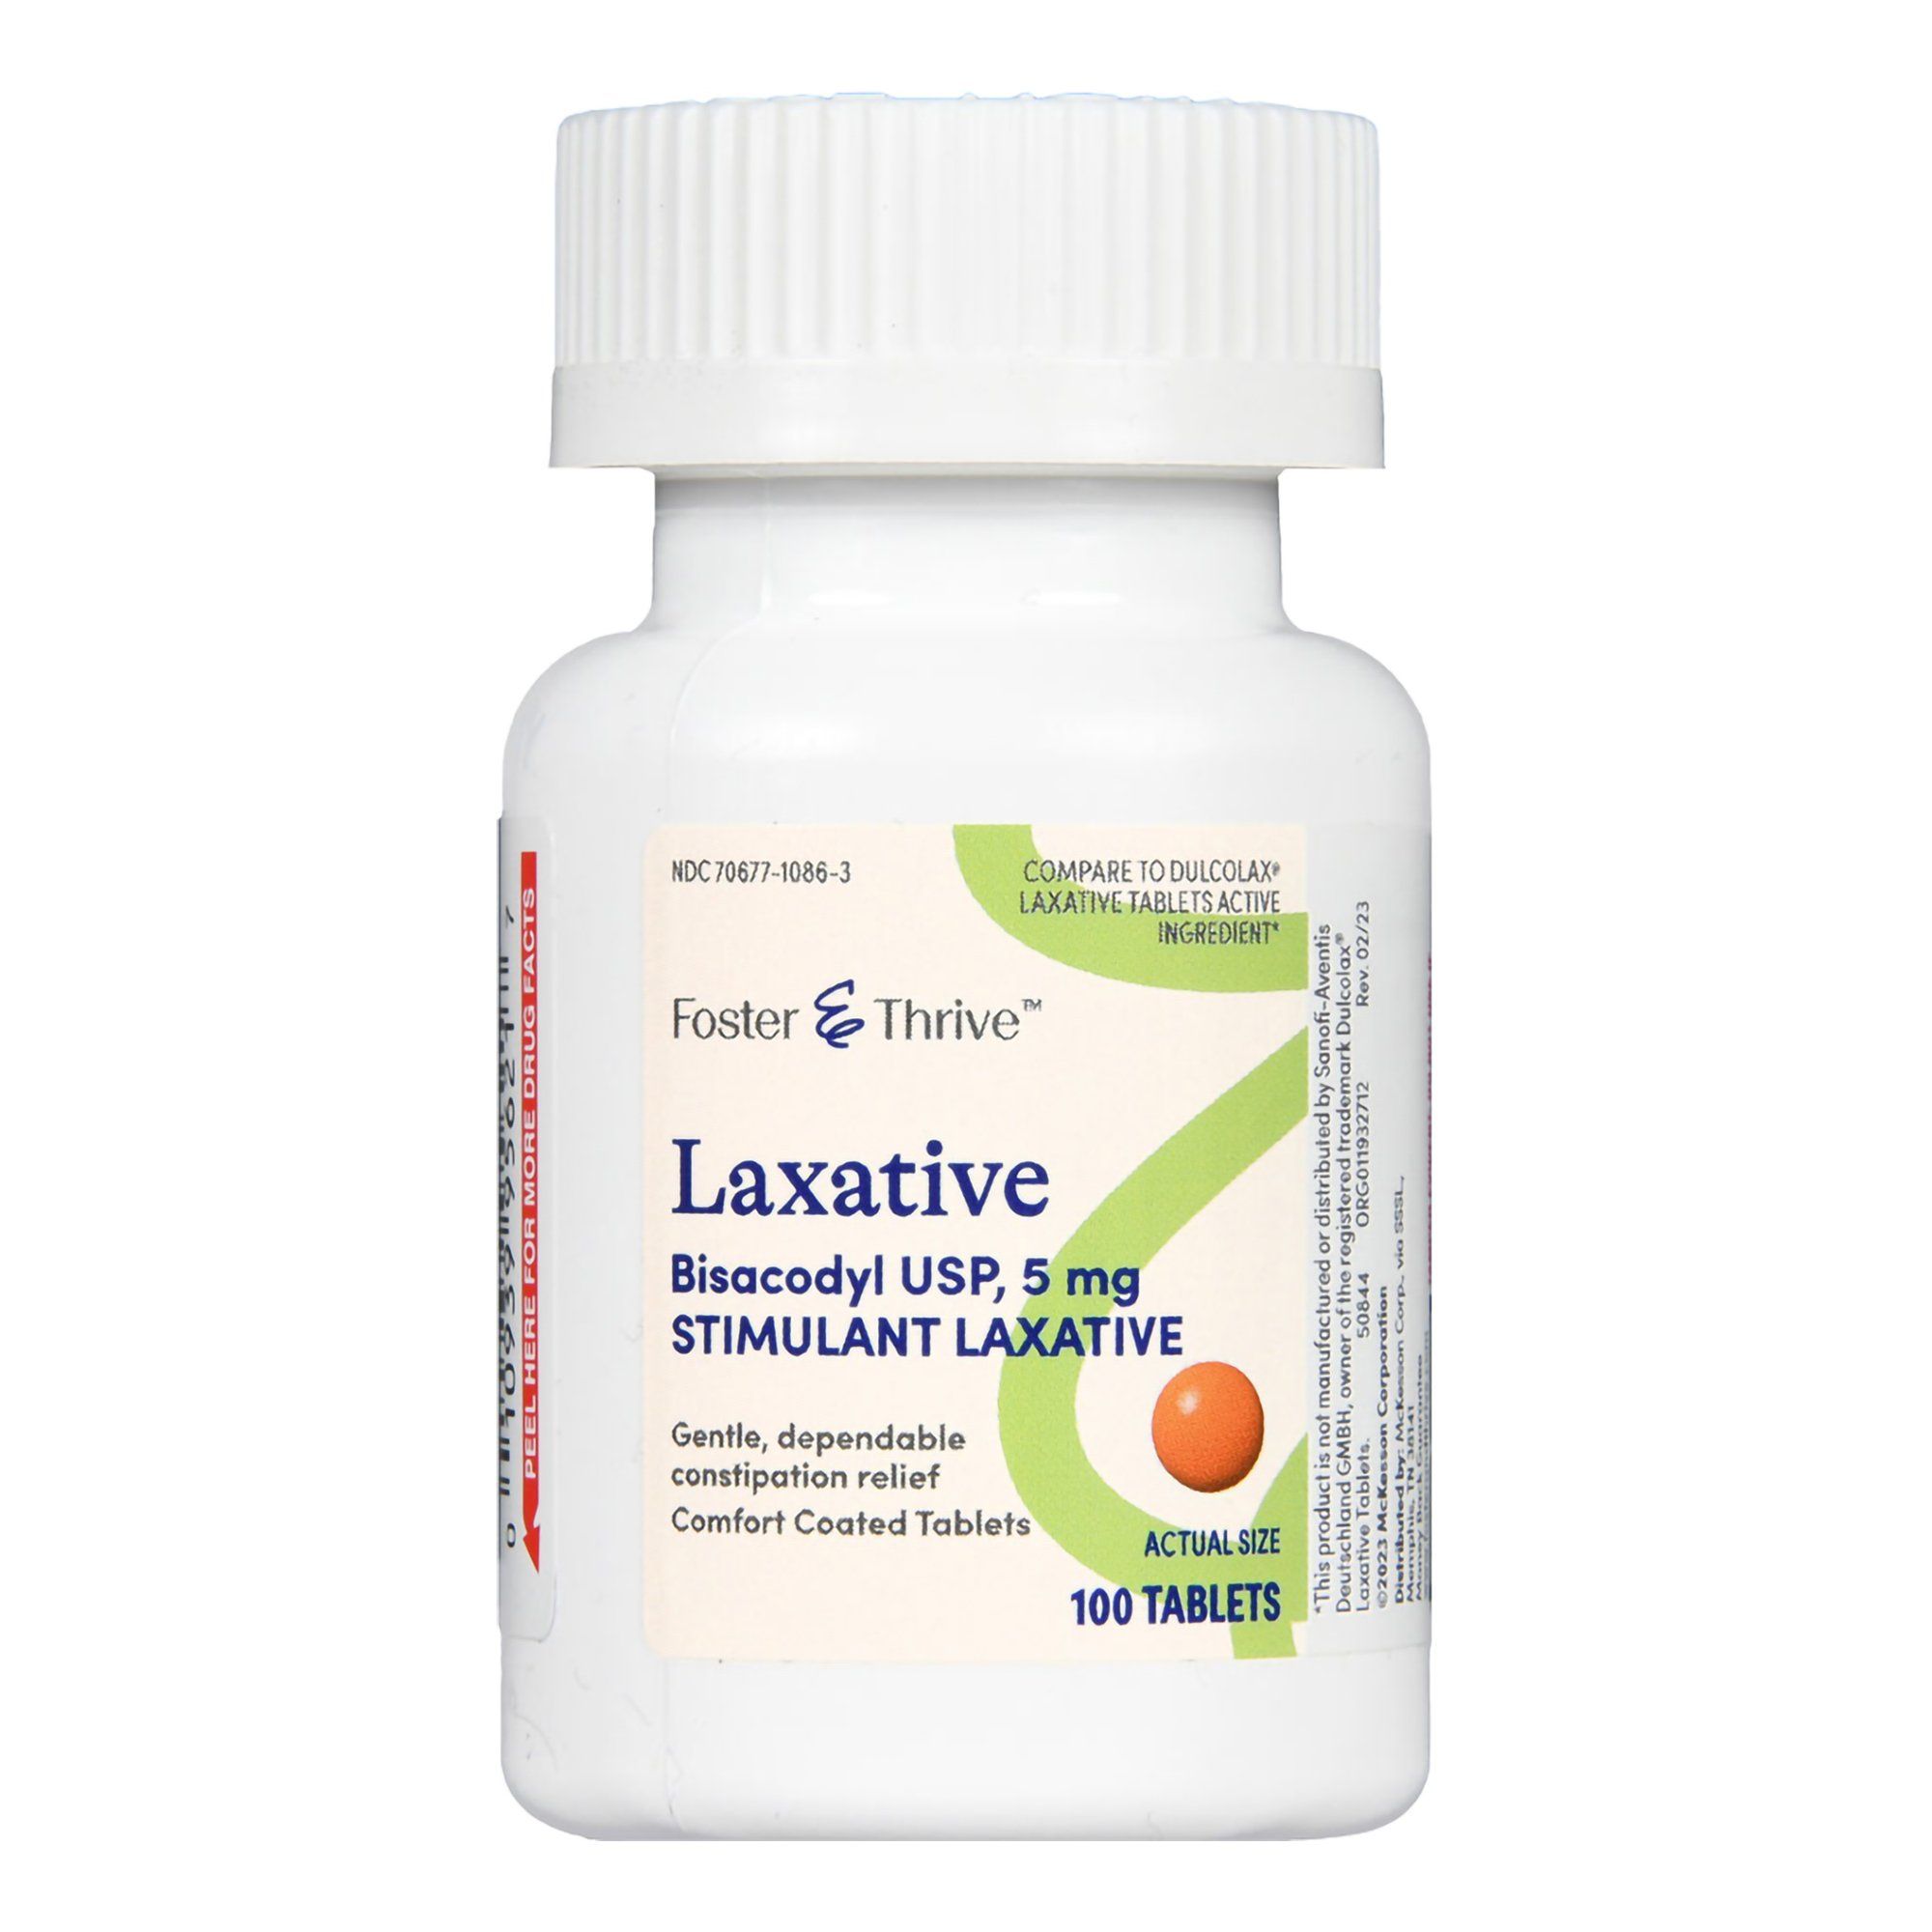 Foster & Thrive Laxative Bisacodyl USP Tablets,  5 mg - 100 ct